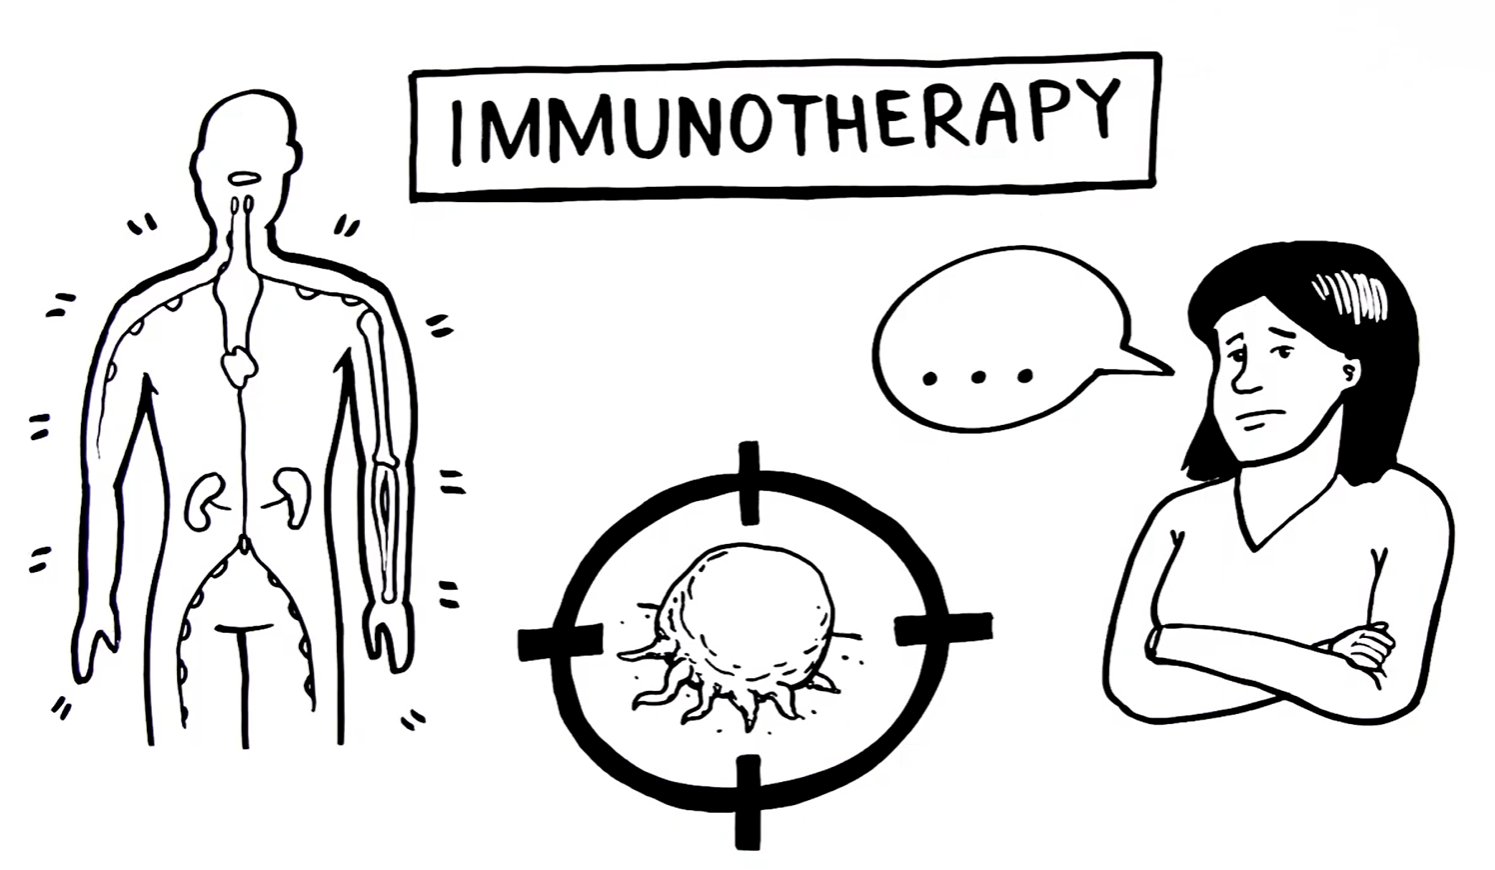 video still showing drawing of the immune system,  a cancer cell being targeted, and a patient with questions.